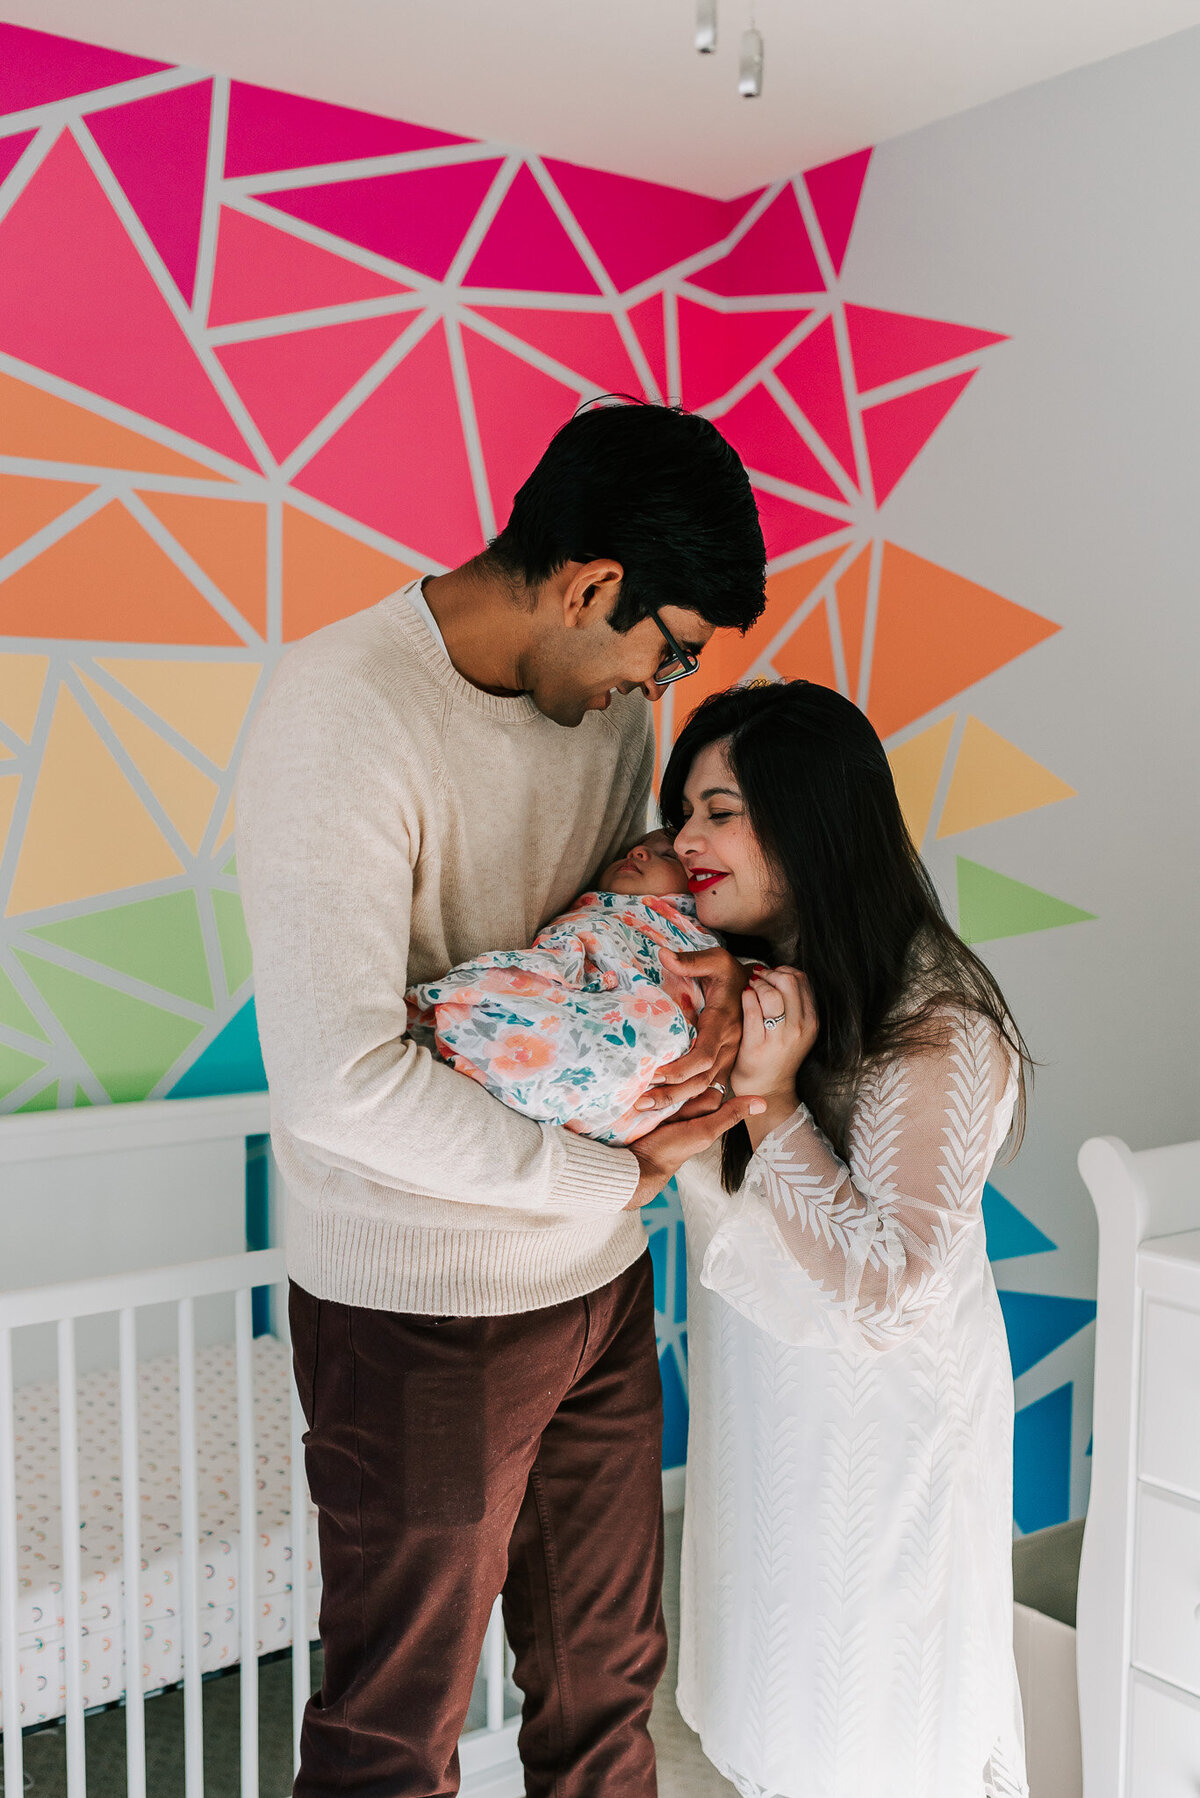 New parents standing in their daughter's nursery with their newborn daughter